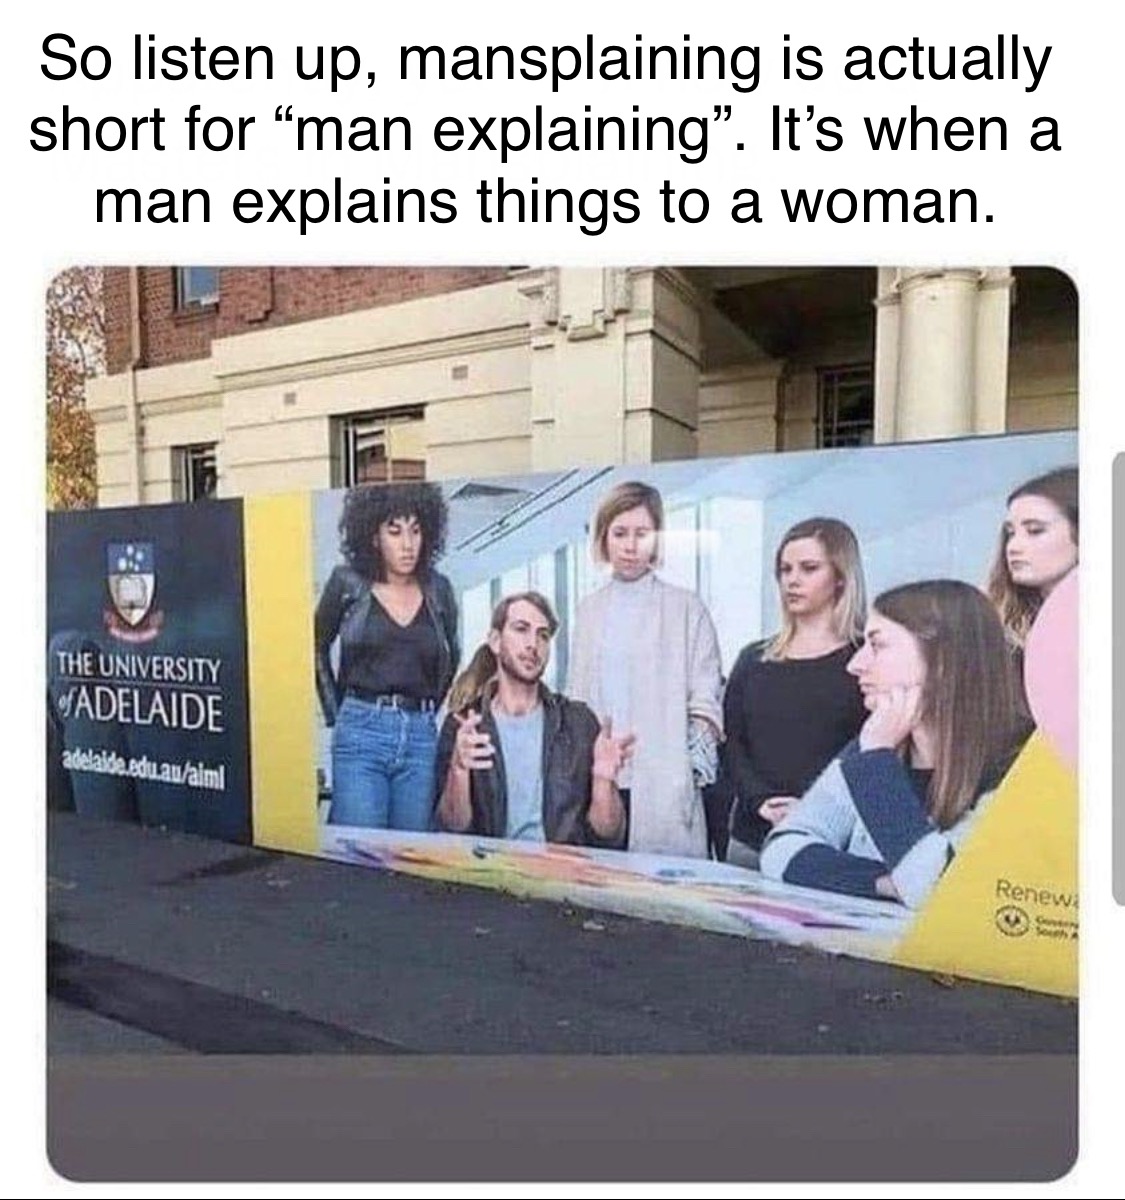 dank memes - masters in mansplaining - So listen up, mansplaining is actually short for "man explaining". It's when a man explains things to a woman. The University Adelaide adelaide.edu.auaiml Tips Renewi Coverre South A